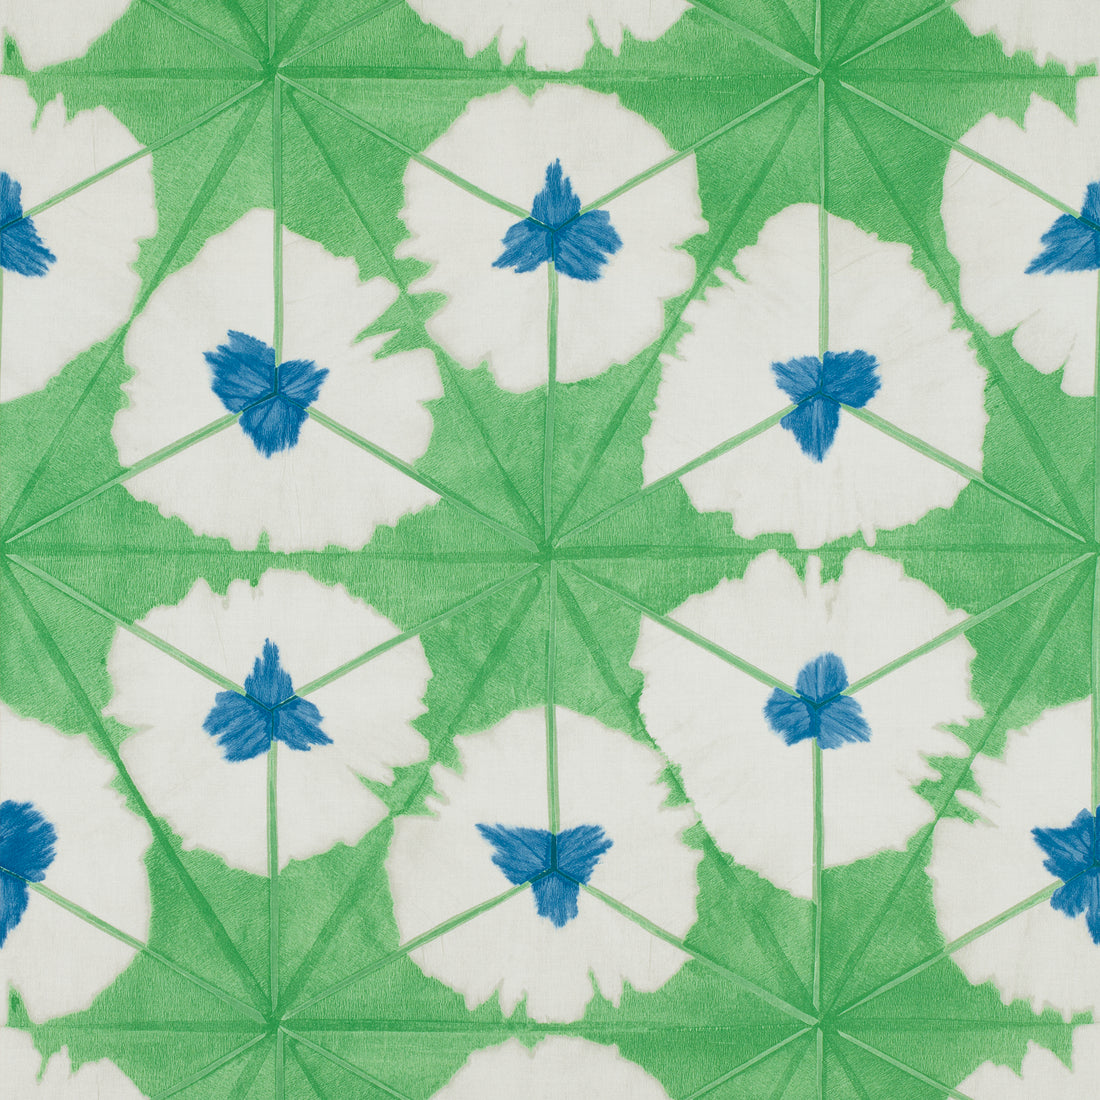 Sunburst fabric in emerald green color - pattern number F913088 - by Thibaut in the Summer House collection